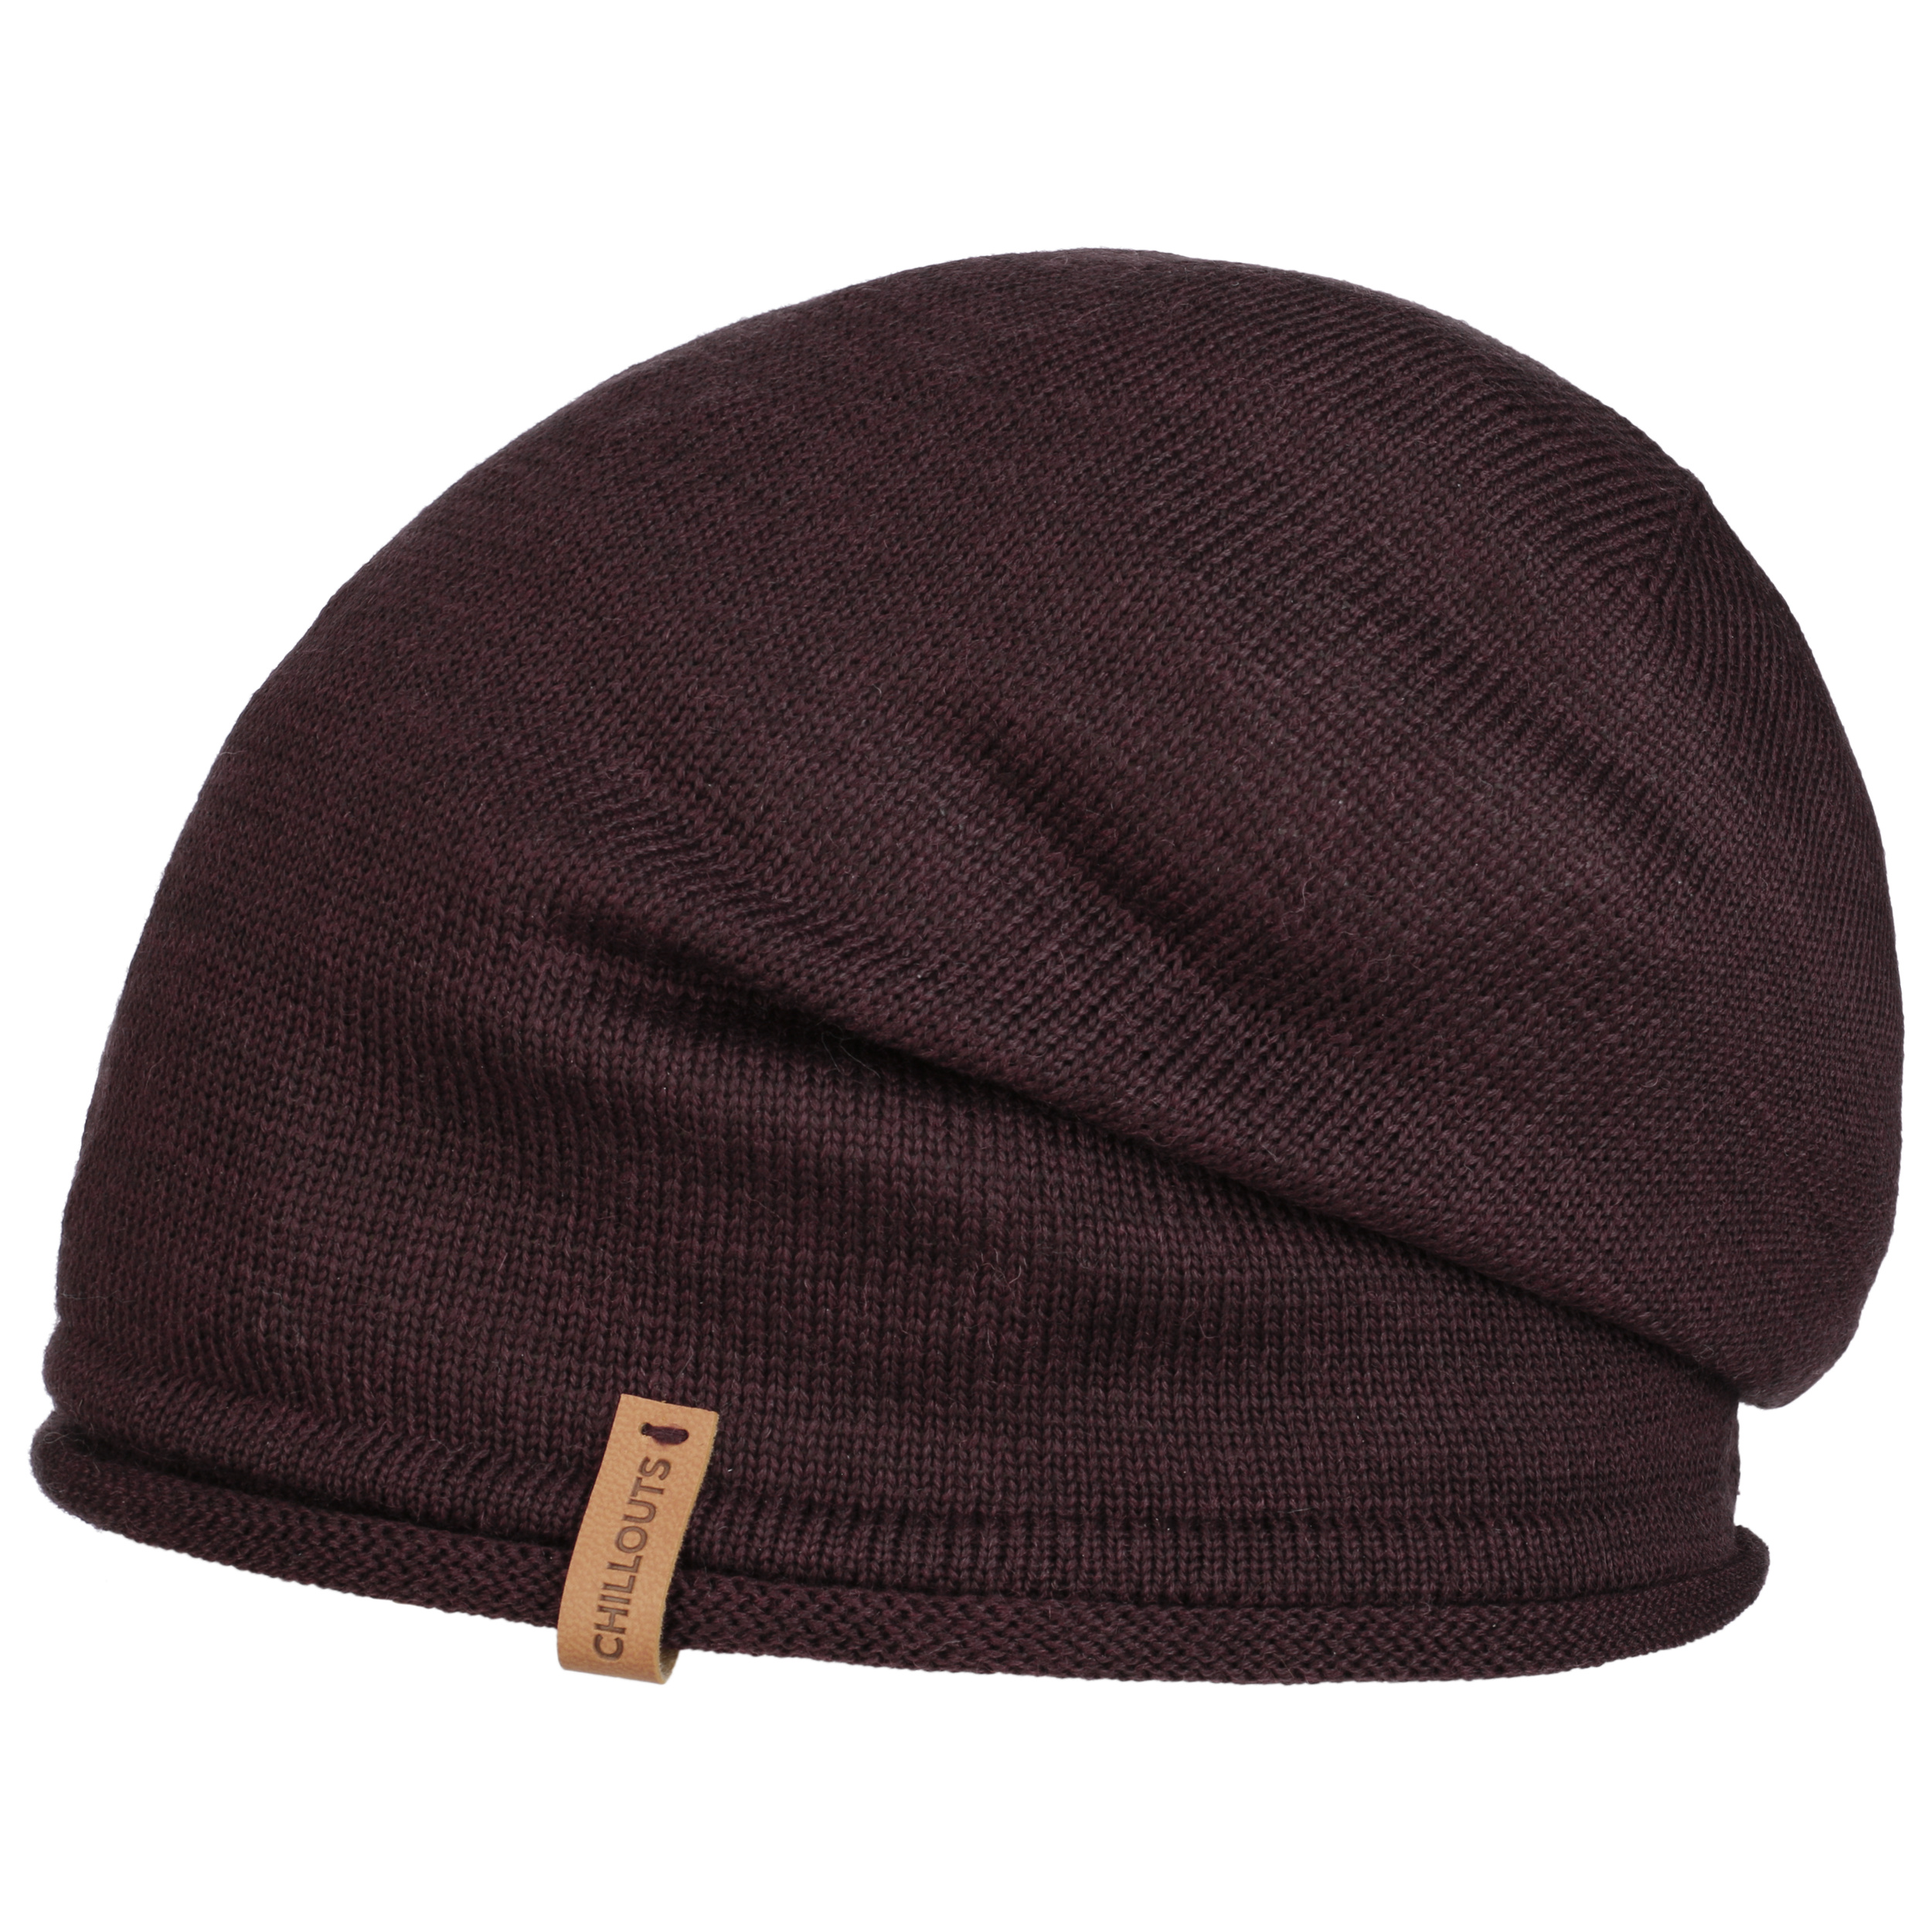 Leicester Oversize Beanie by Chillouts - 29,95 €